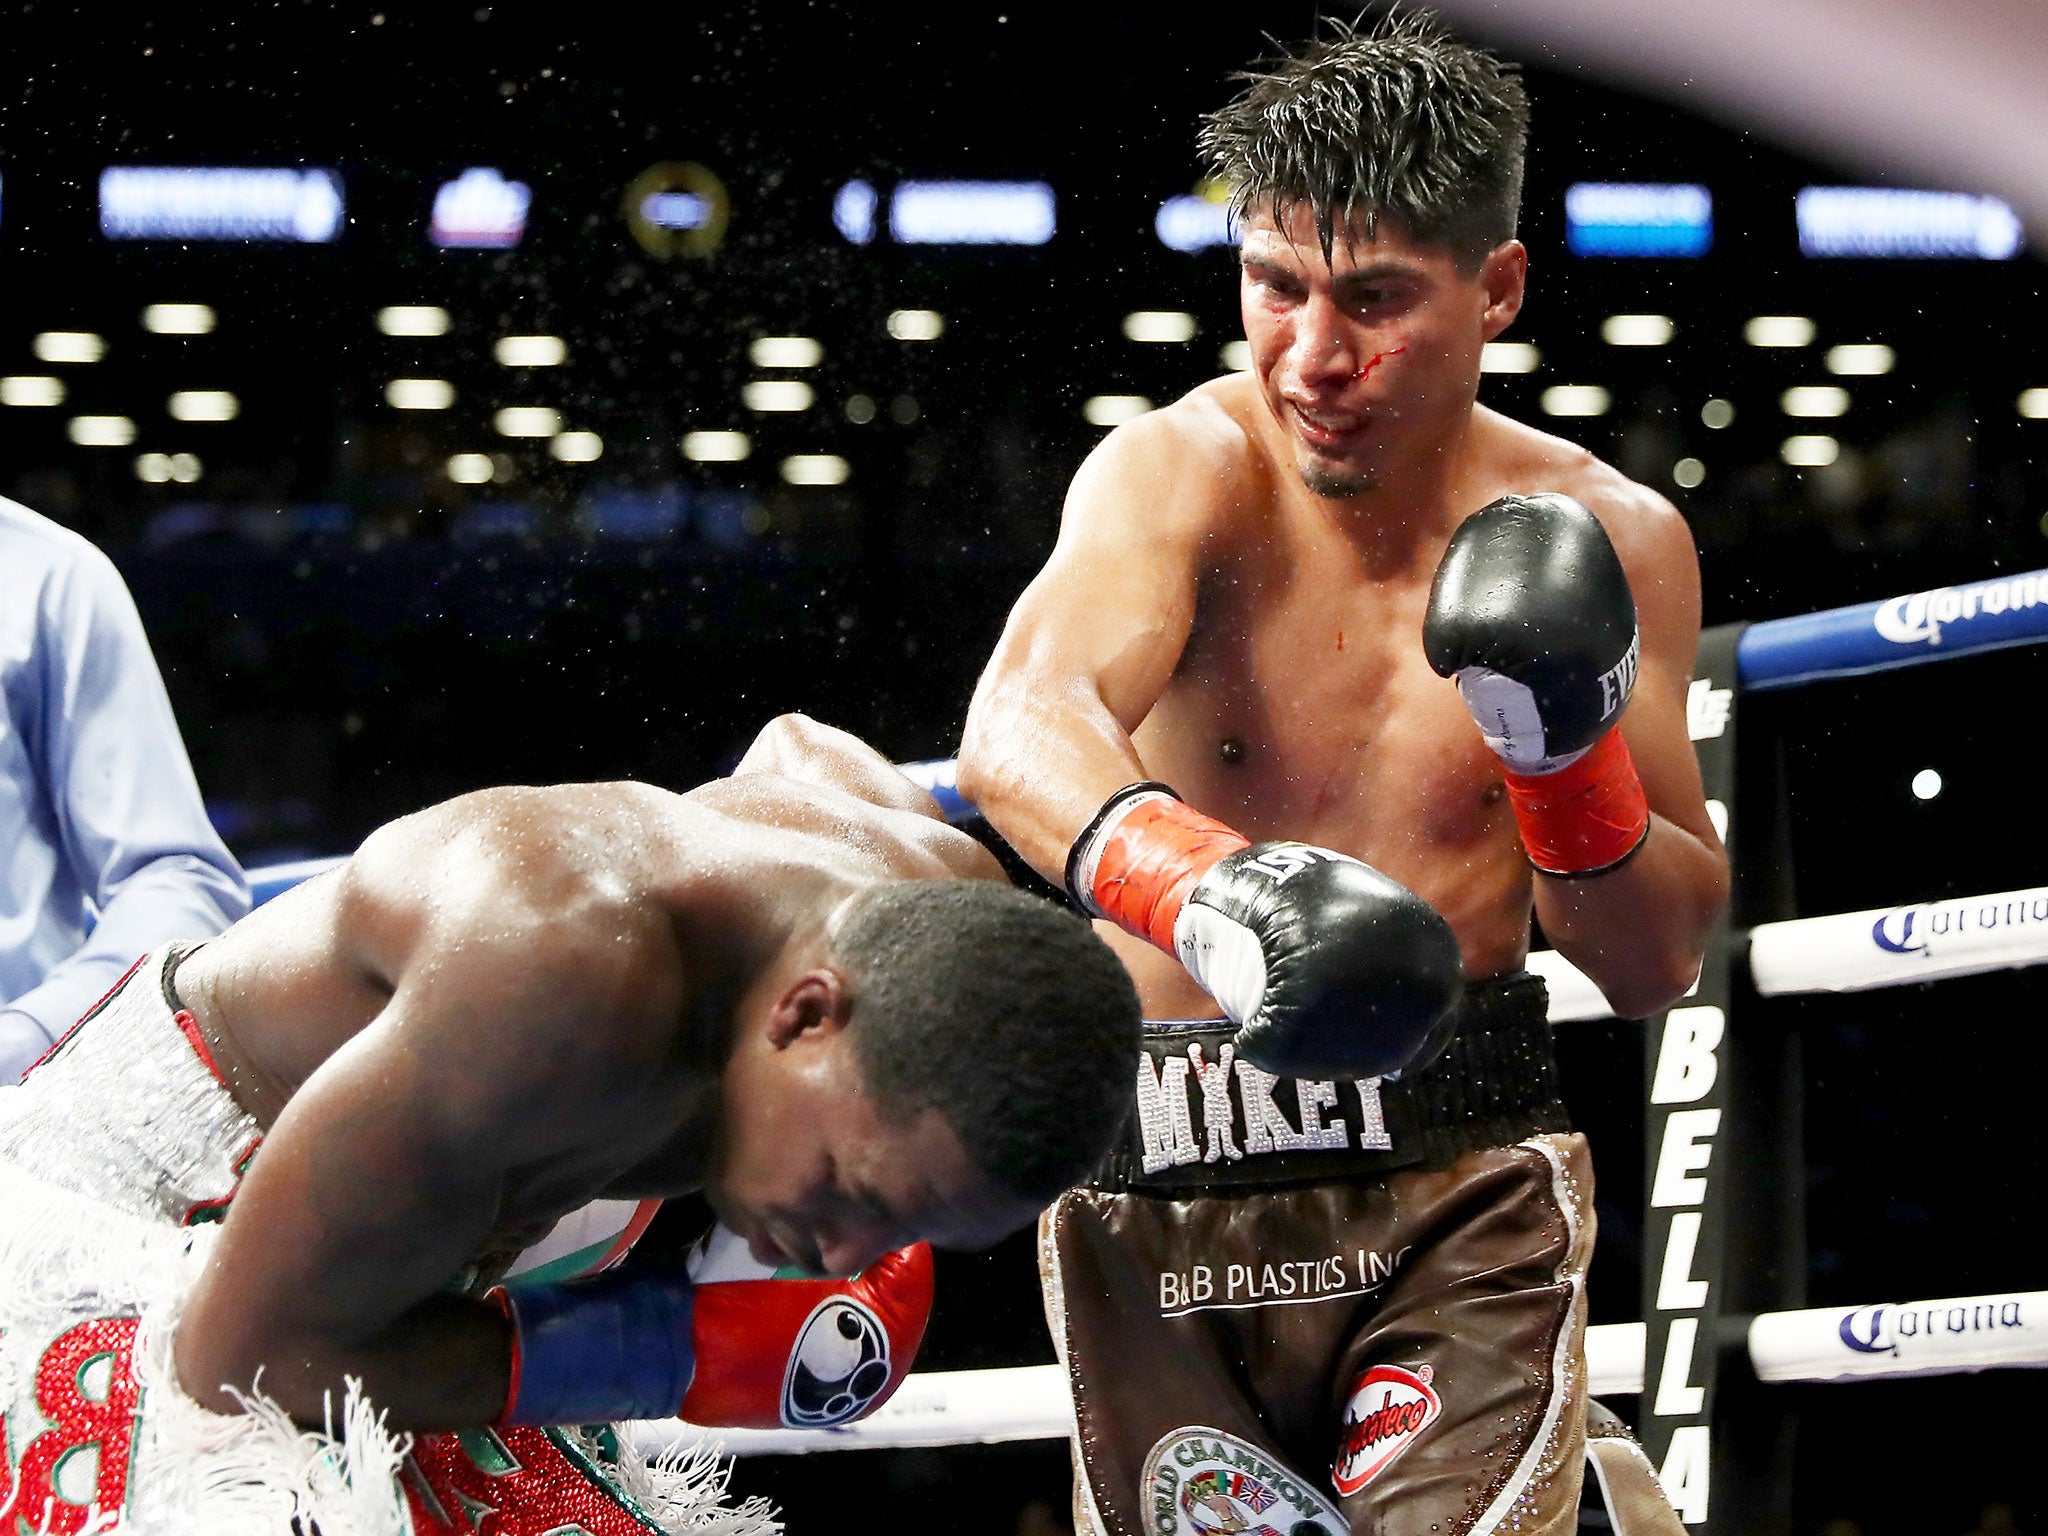 Mikey Garcia remained undefeated by beating Adrien Broner on Saturday night